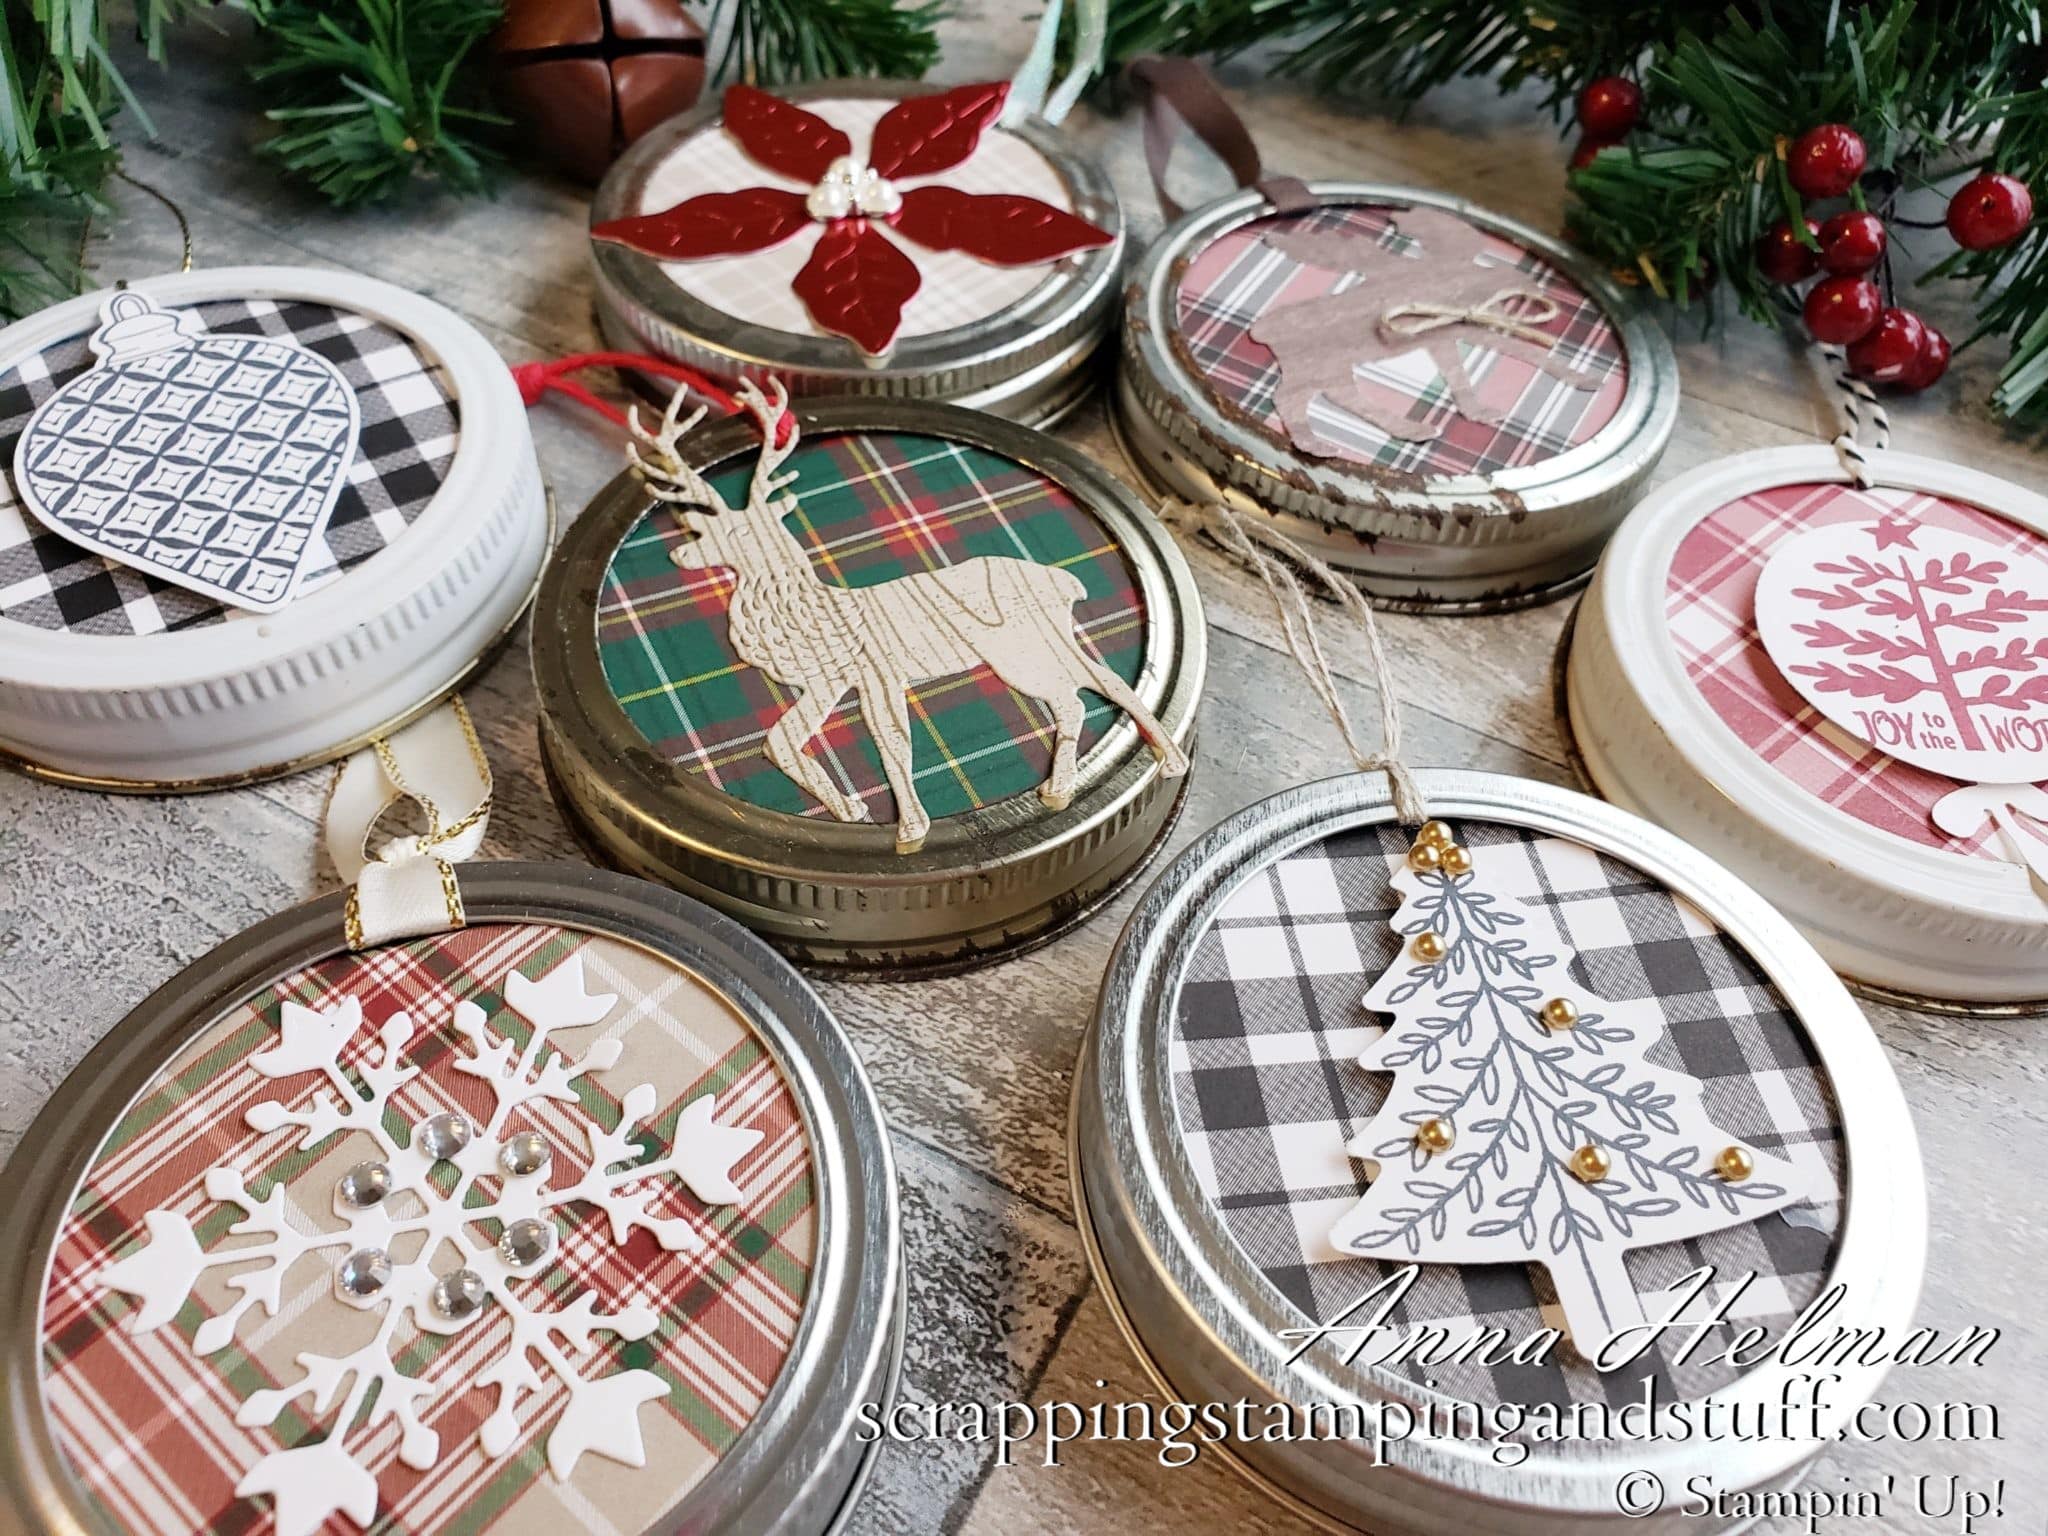 Jar Ring Ornaments – Day 11 of 12 Days of DIY Gift Ideas